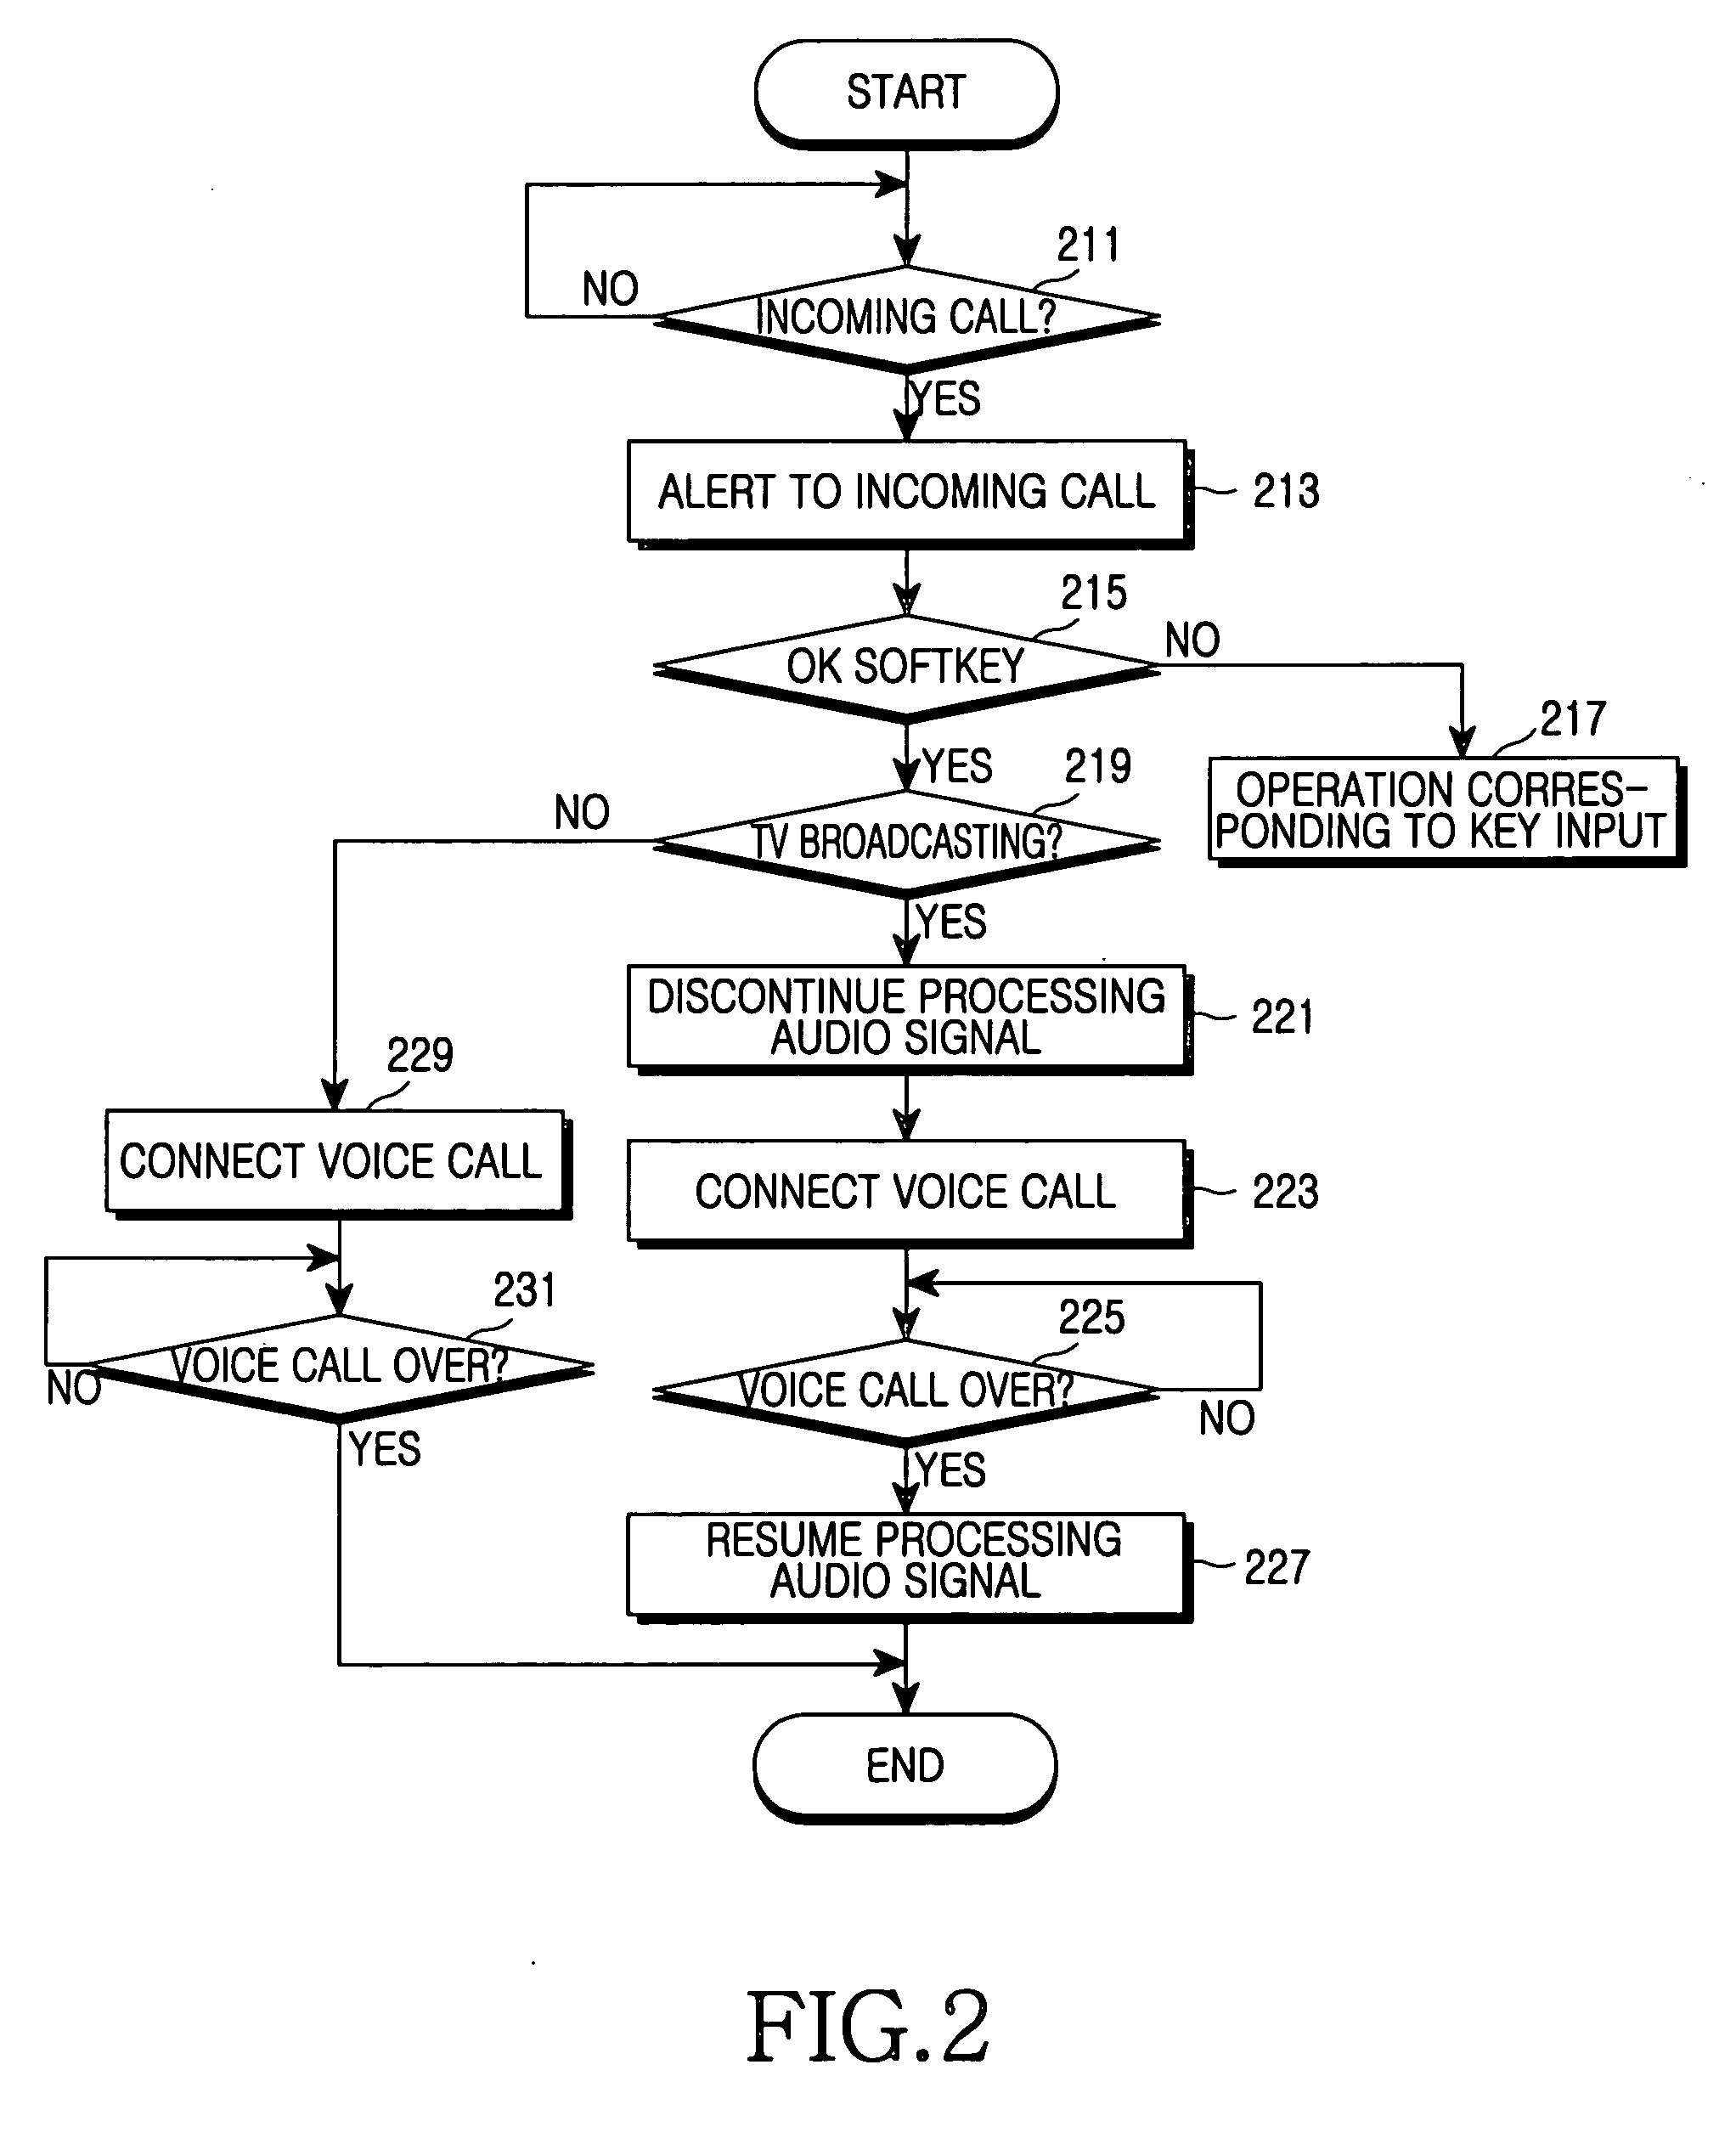 Apparatus and method for processing multimedia audio signal for a voice call in a mobile terminal capable of receiving digital multimedia broadcasting service